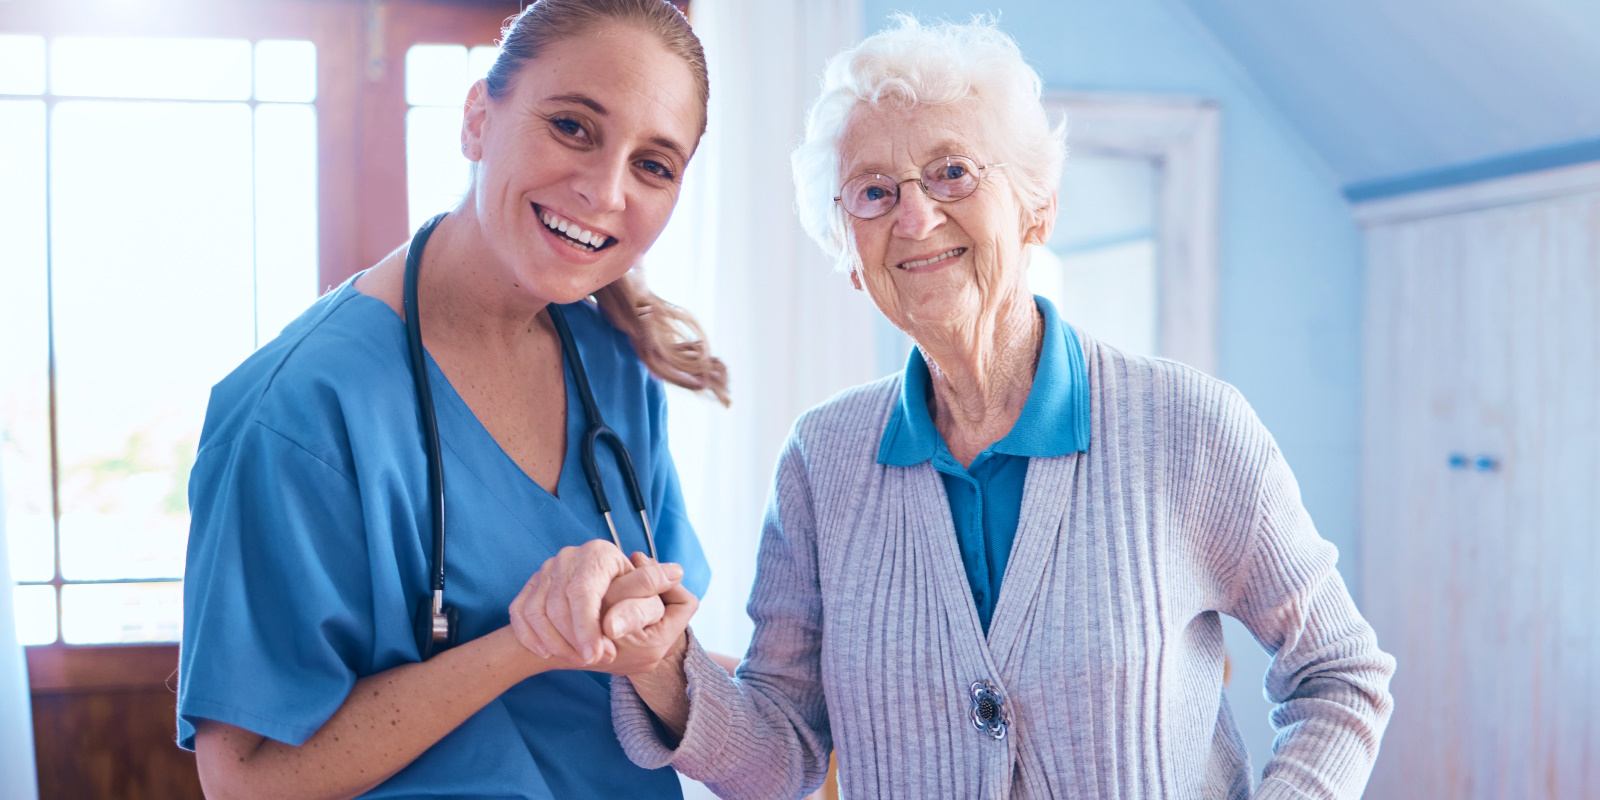 Communicating Effectively with Caregivers